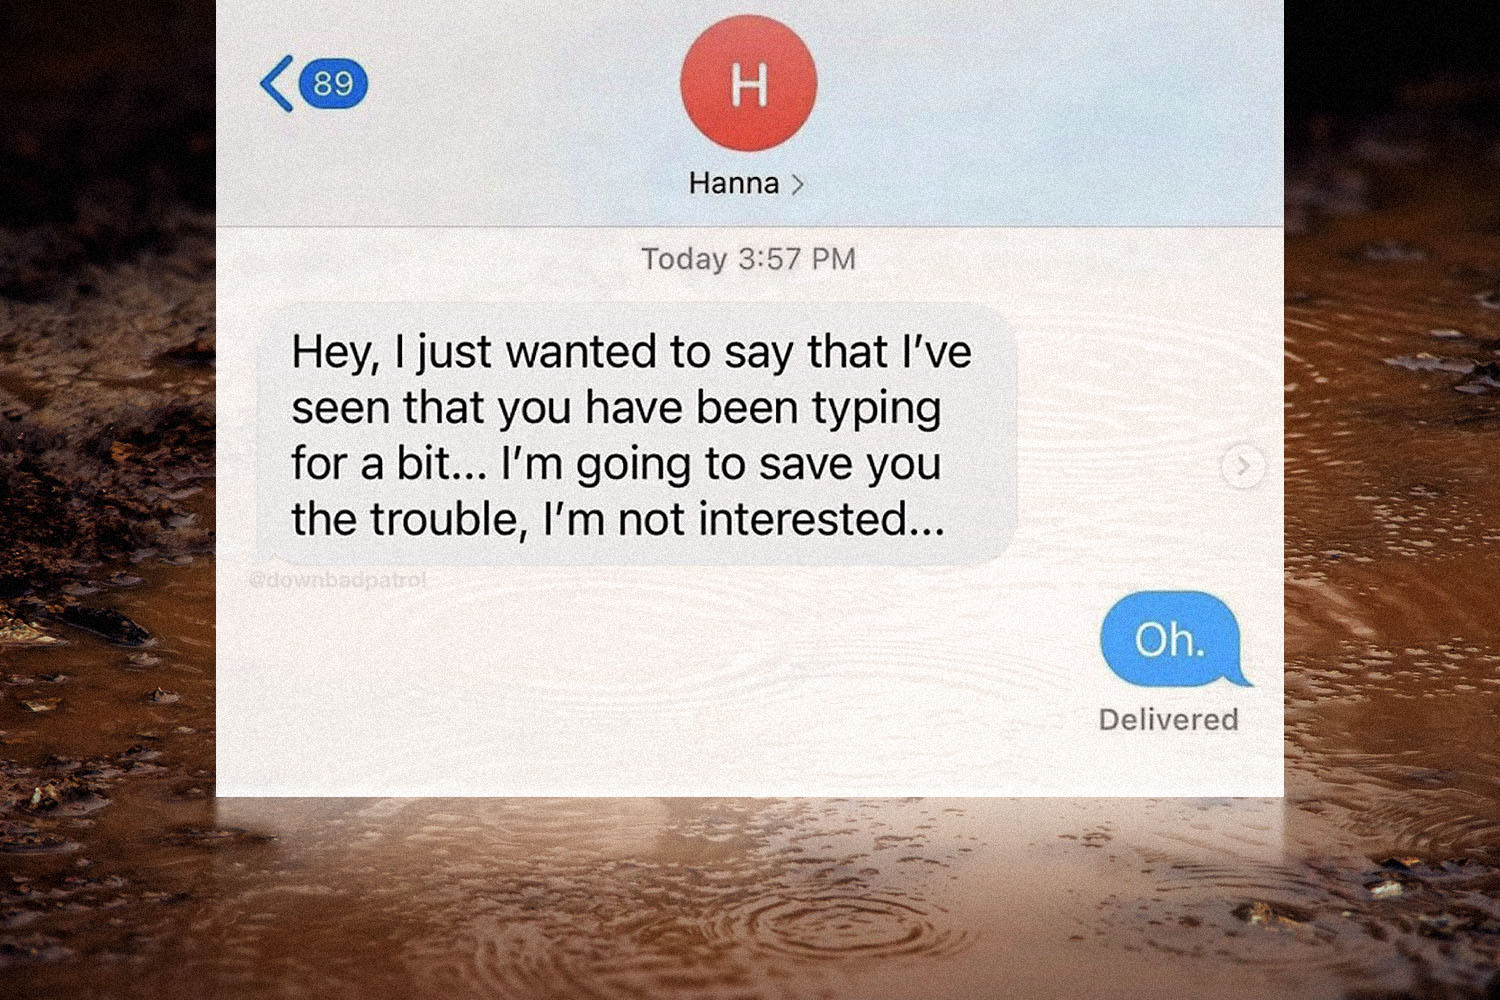 A screenshot of a text message that says oh in response to another message that reads Oh in reply to received text message reads: Hey, I just wanted to say that I've seen that you have been typing for a bit ... I'm going to save you the trouble, I'm not interested...